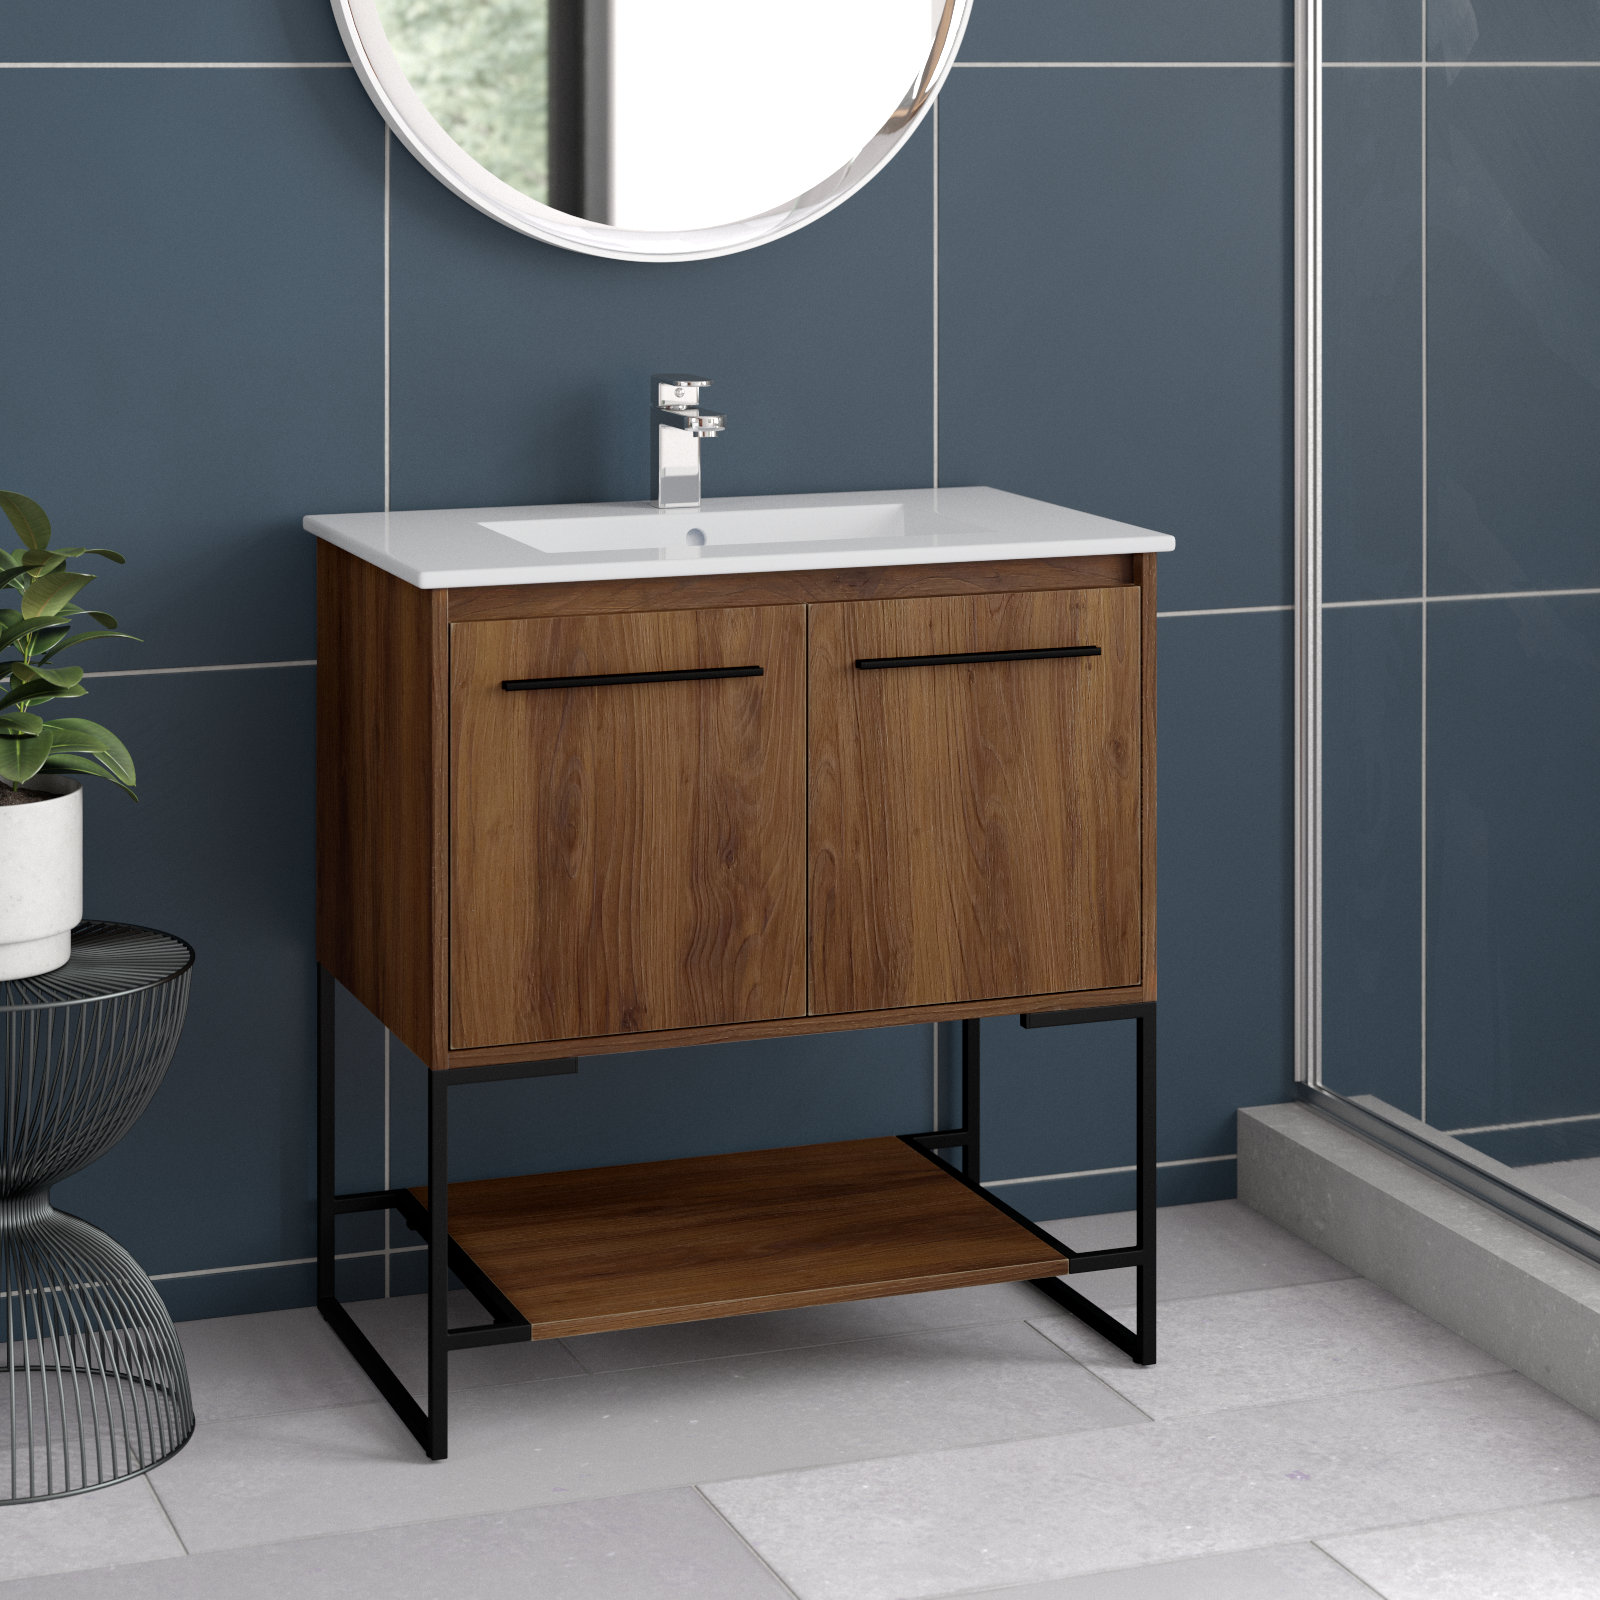 26 Bathroom Vanity Ideas That Are Stylish and Functional